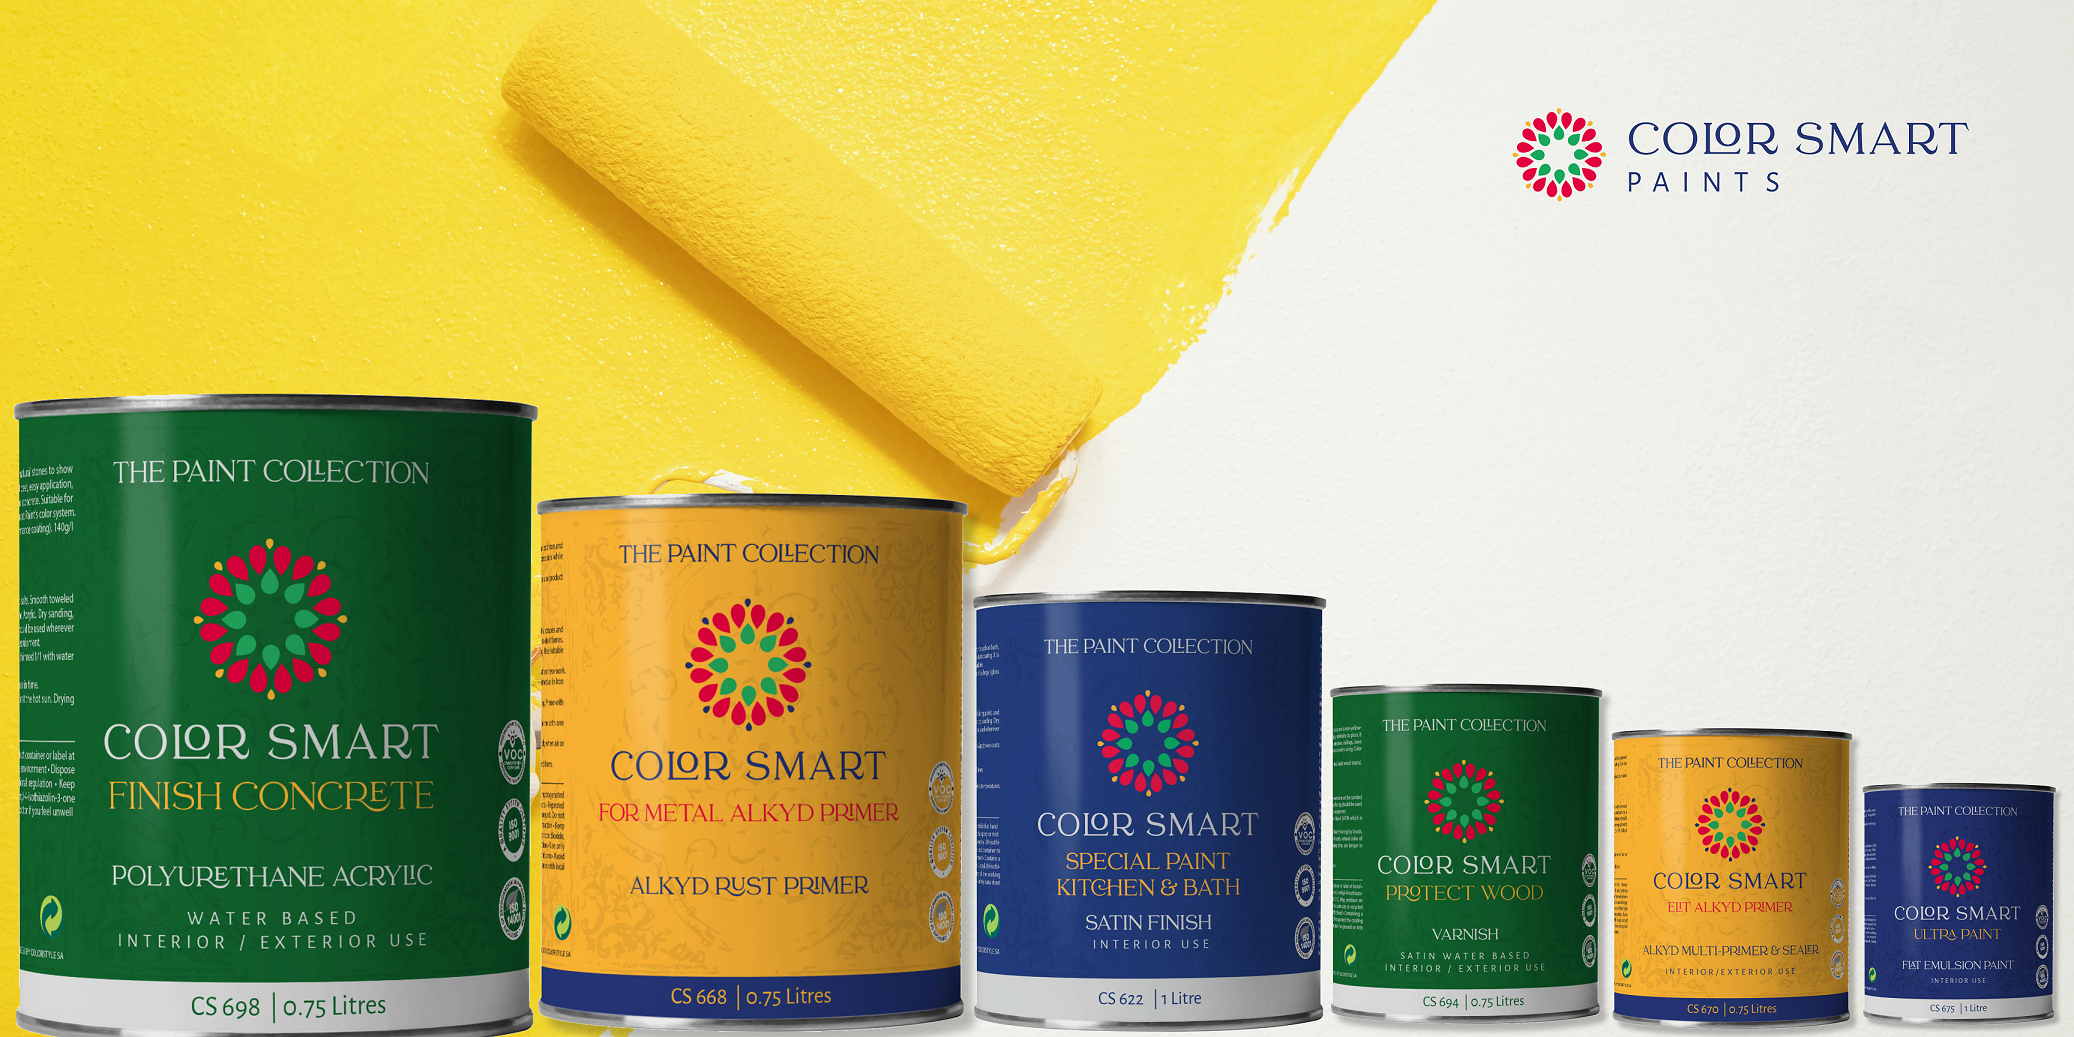 Color Smart invests over 800,000 euros in its own premium paint brand